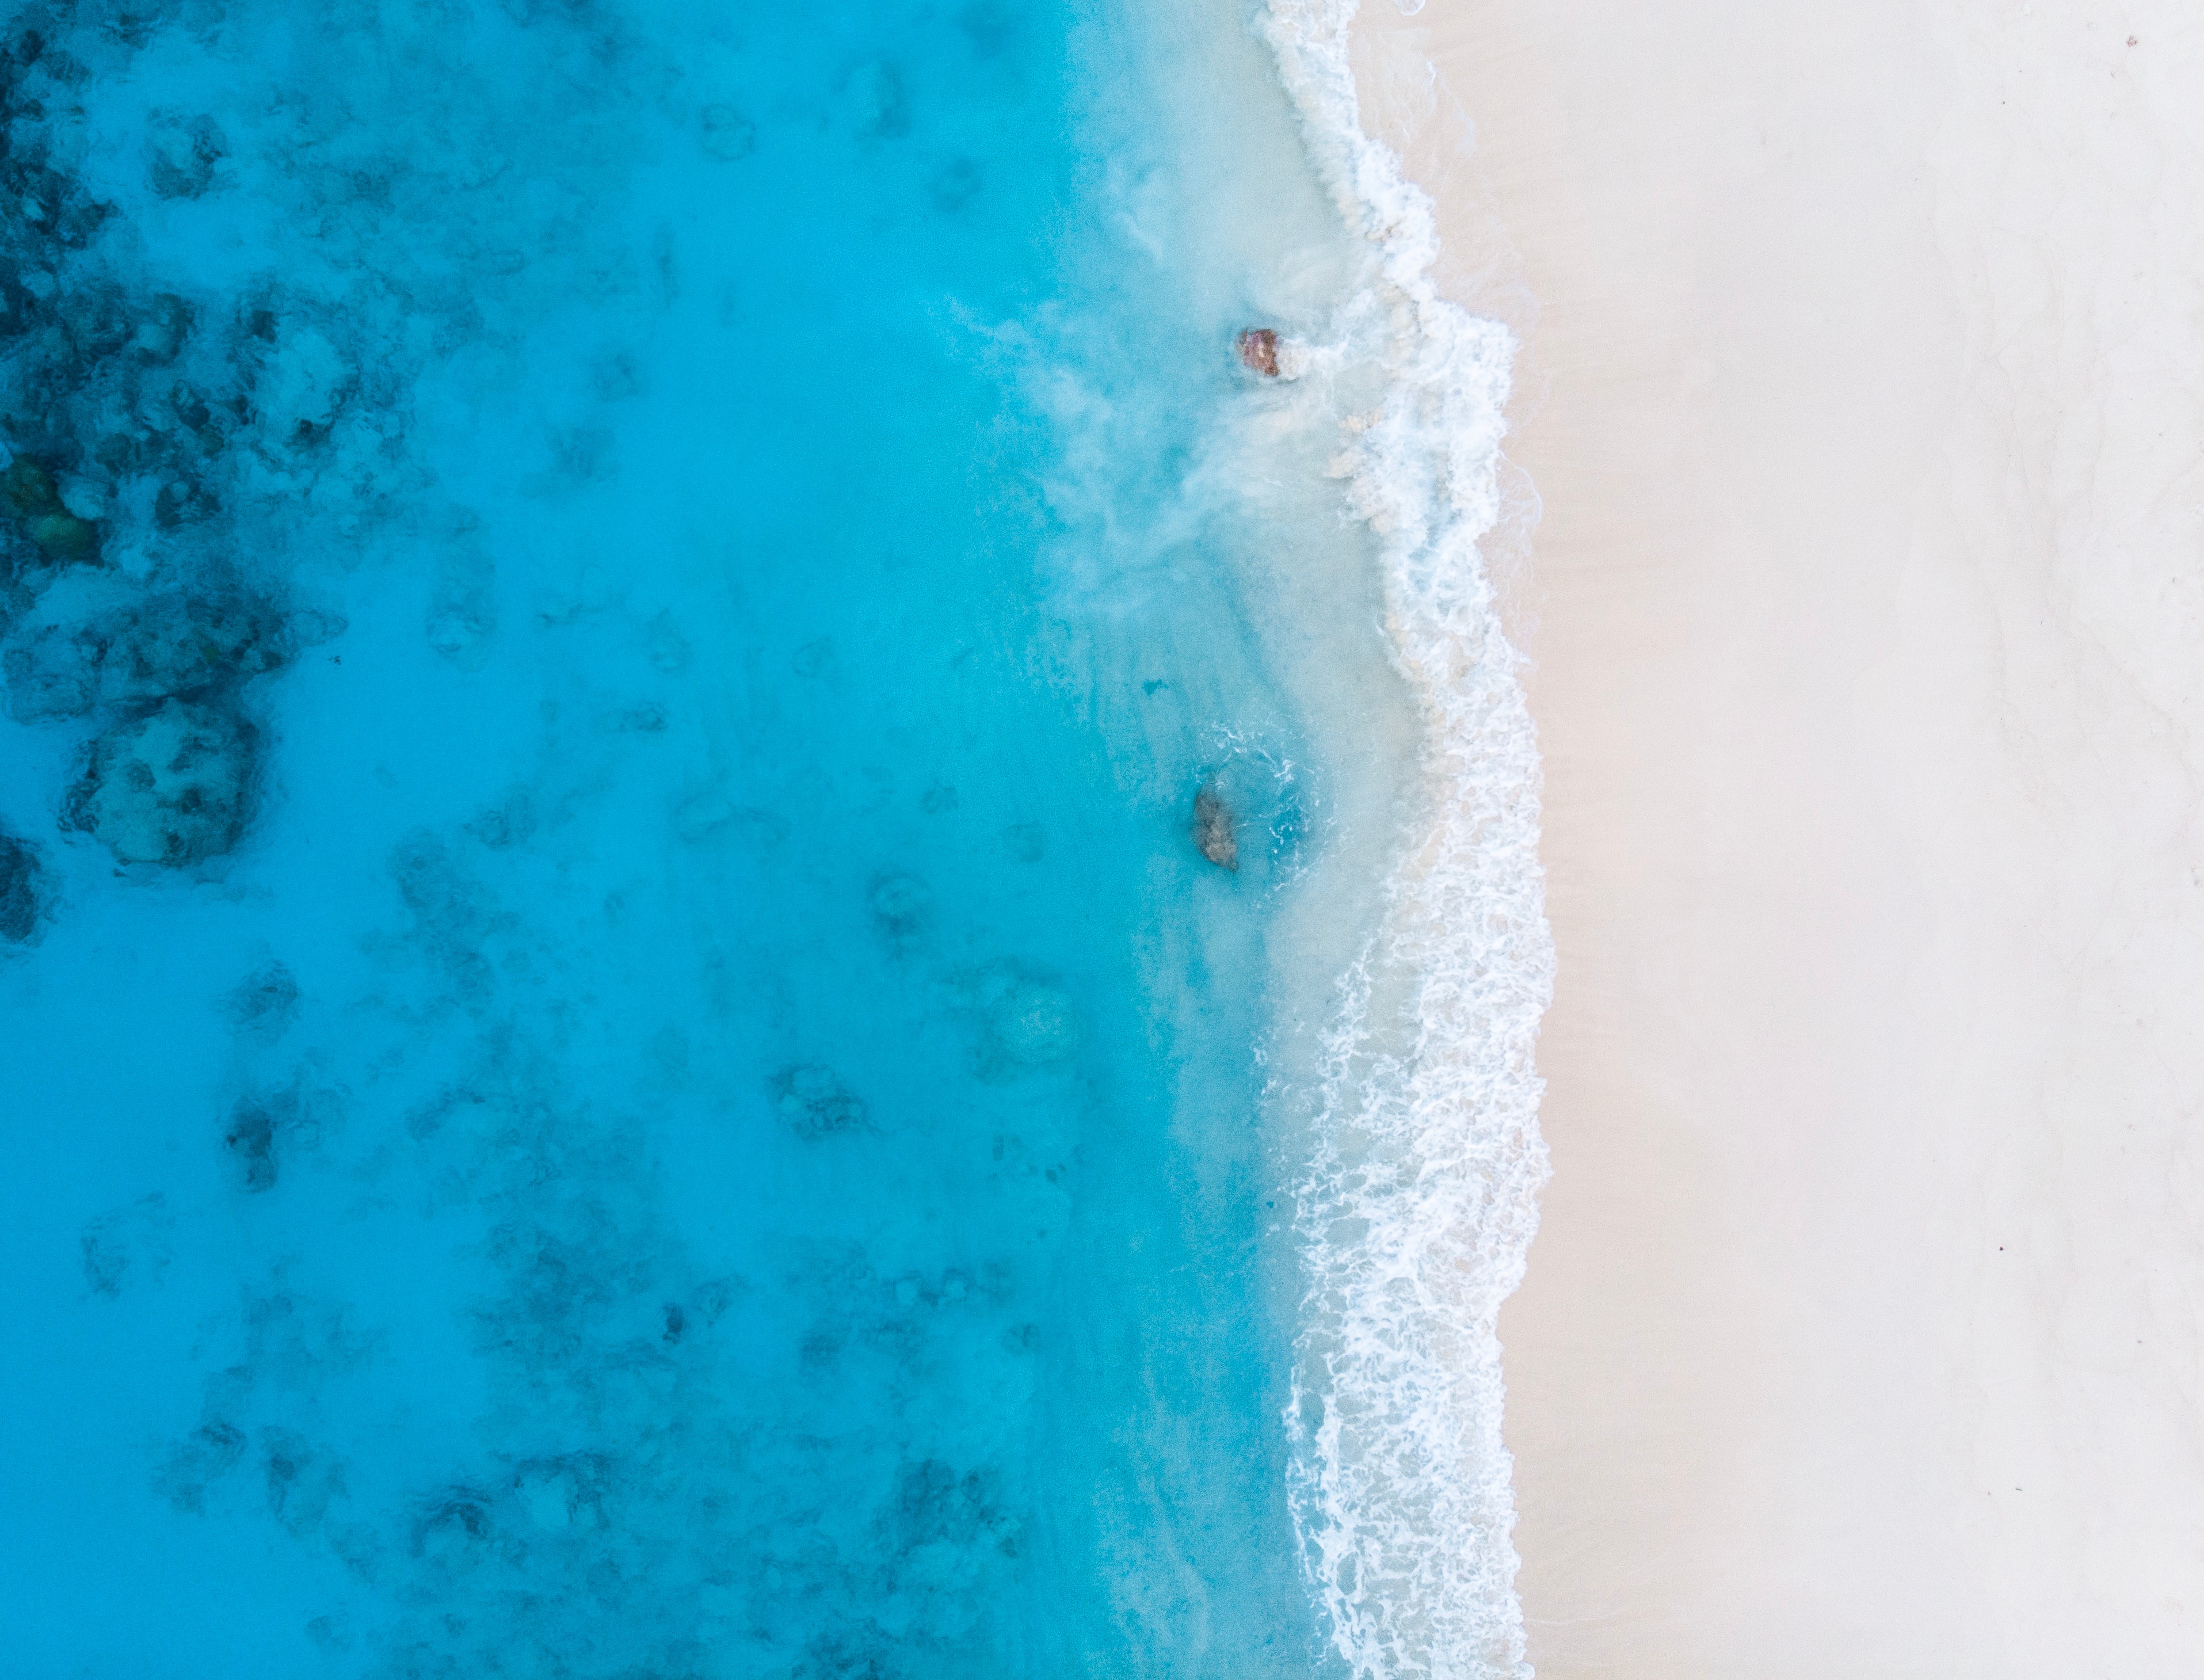 Phone Background Full HD nature, view from above, surf, beach